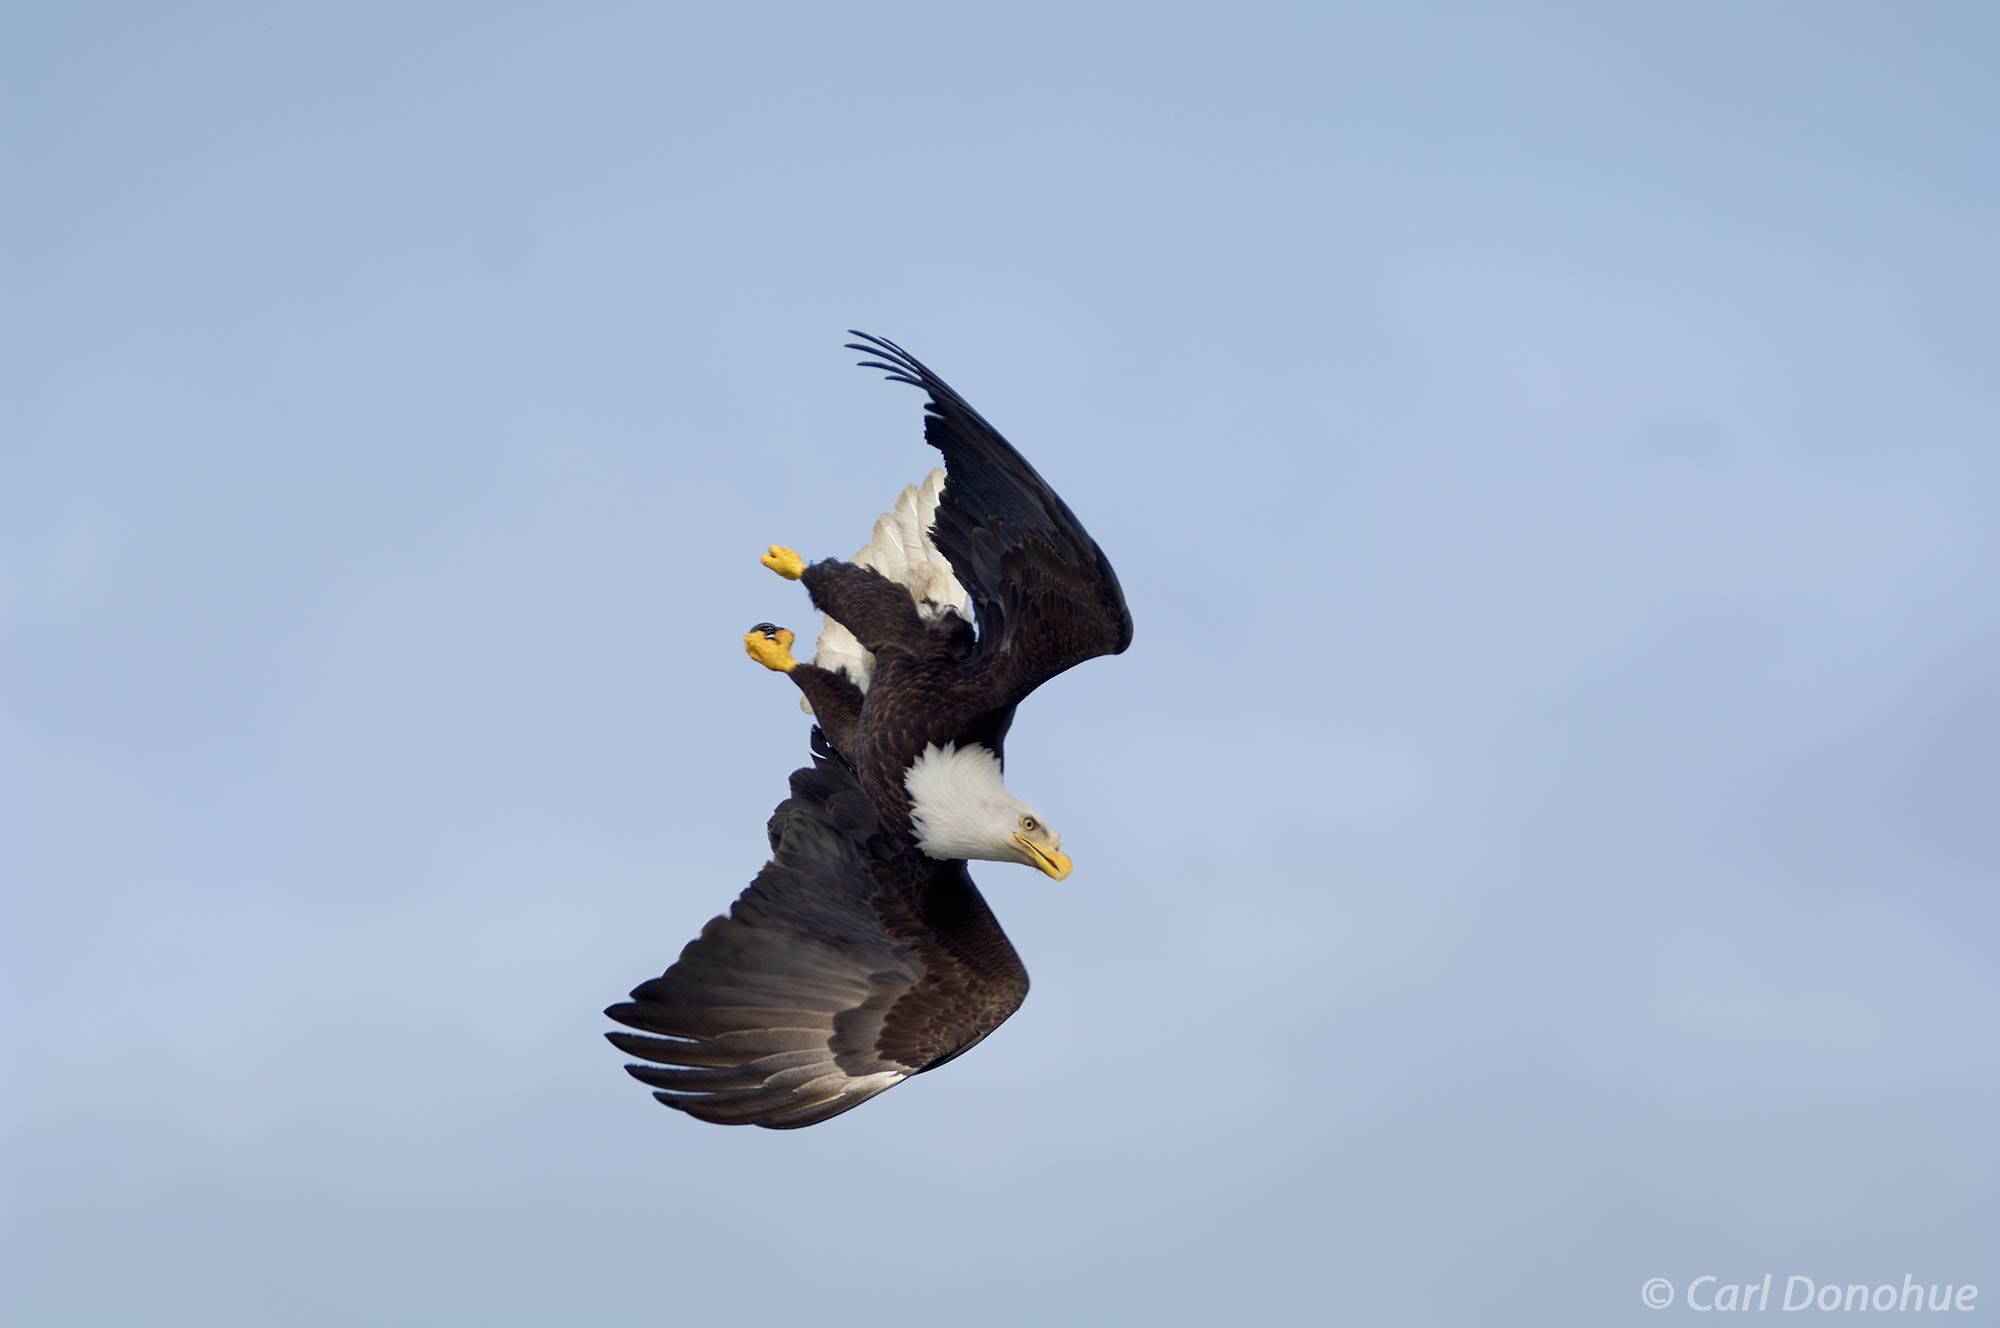 The Haliaeetus leucocephalus, or bald eagle, flies above the waters of Kachemak Bay in search of fish. Bald eagle fishing in...